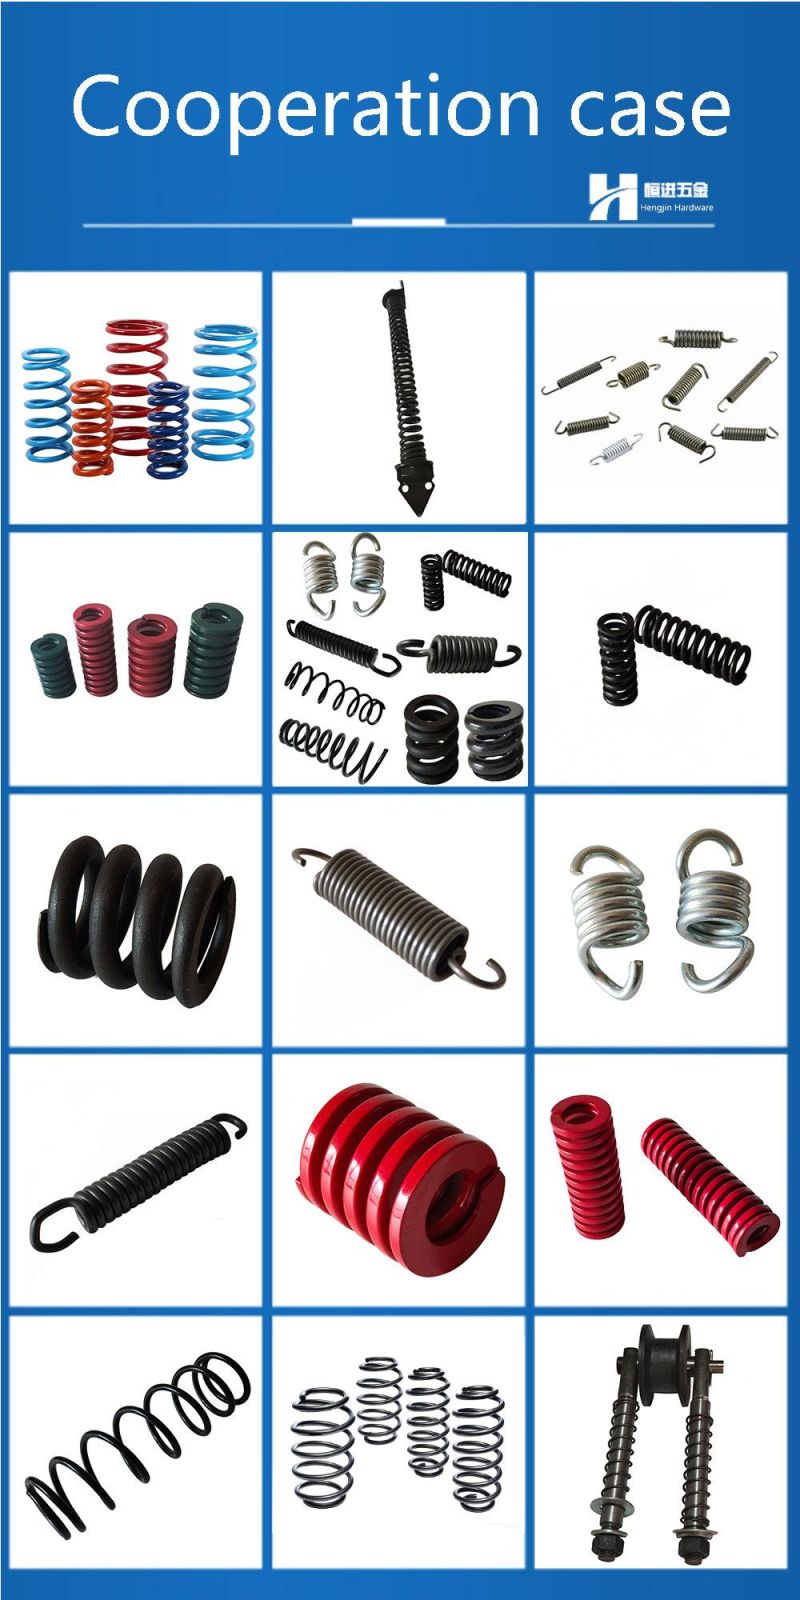 OEM Various Small Thin Wire Closed End Compression Springs